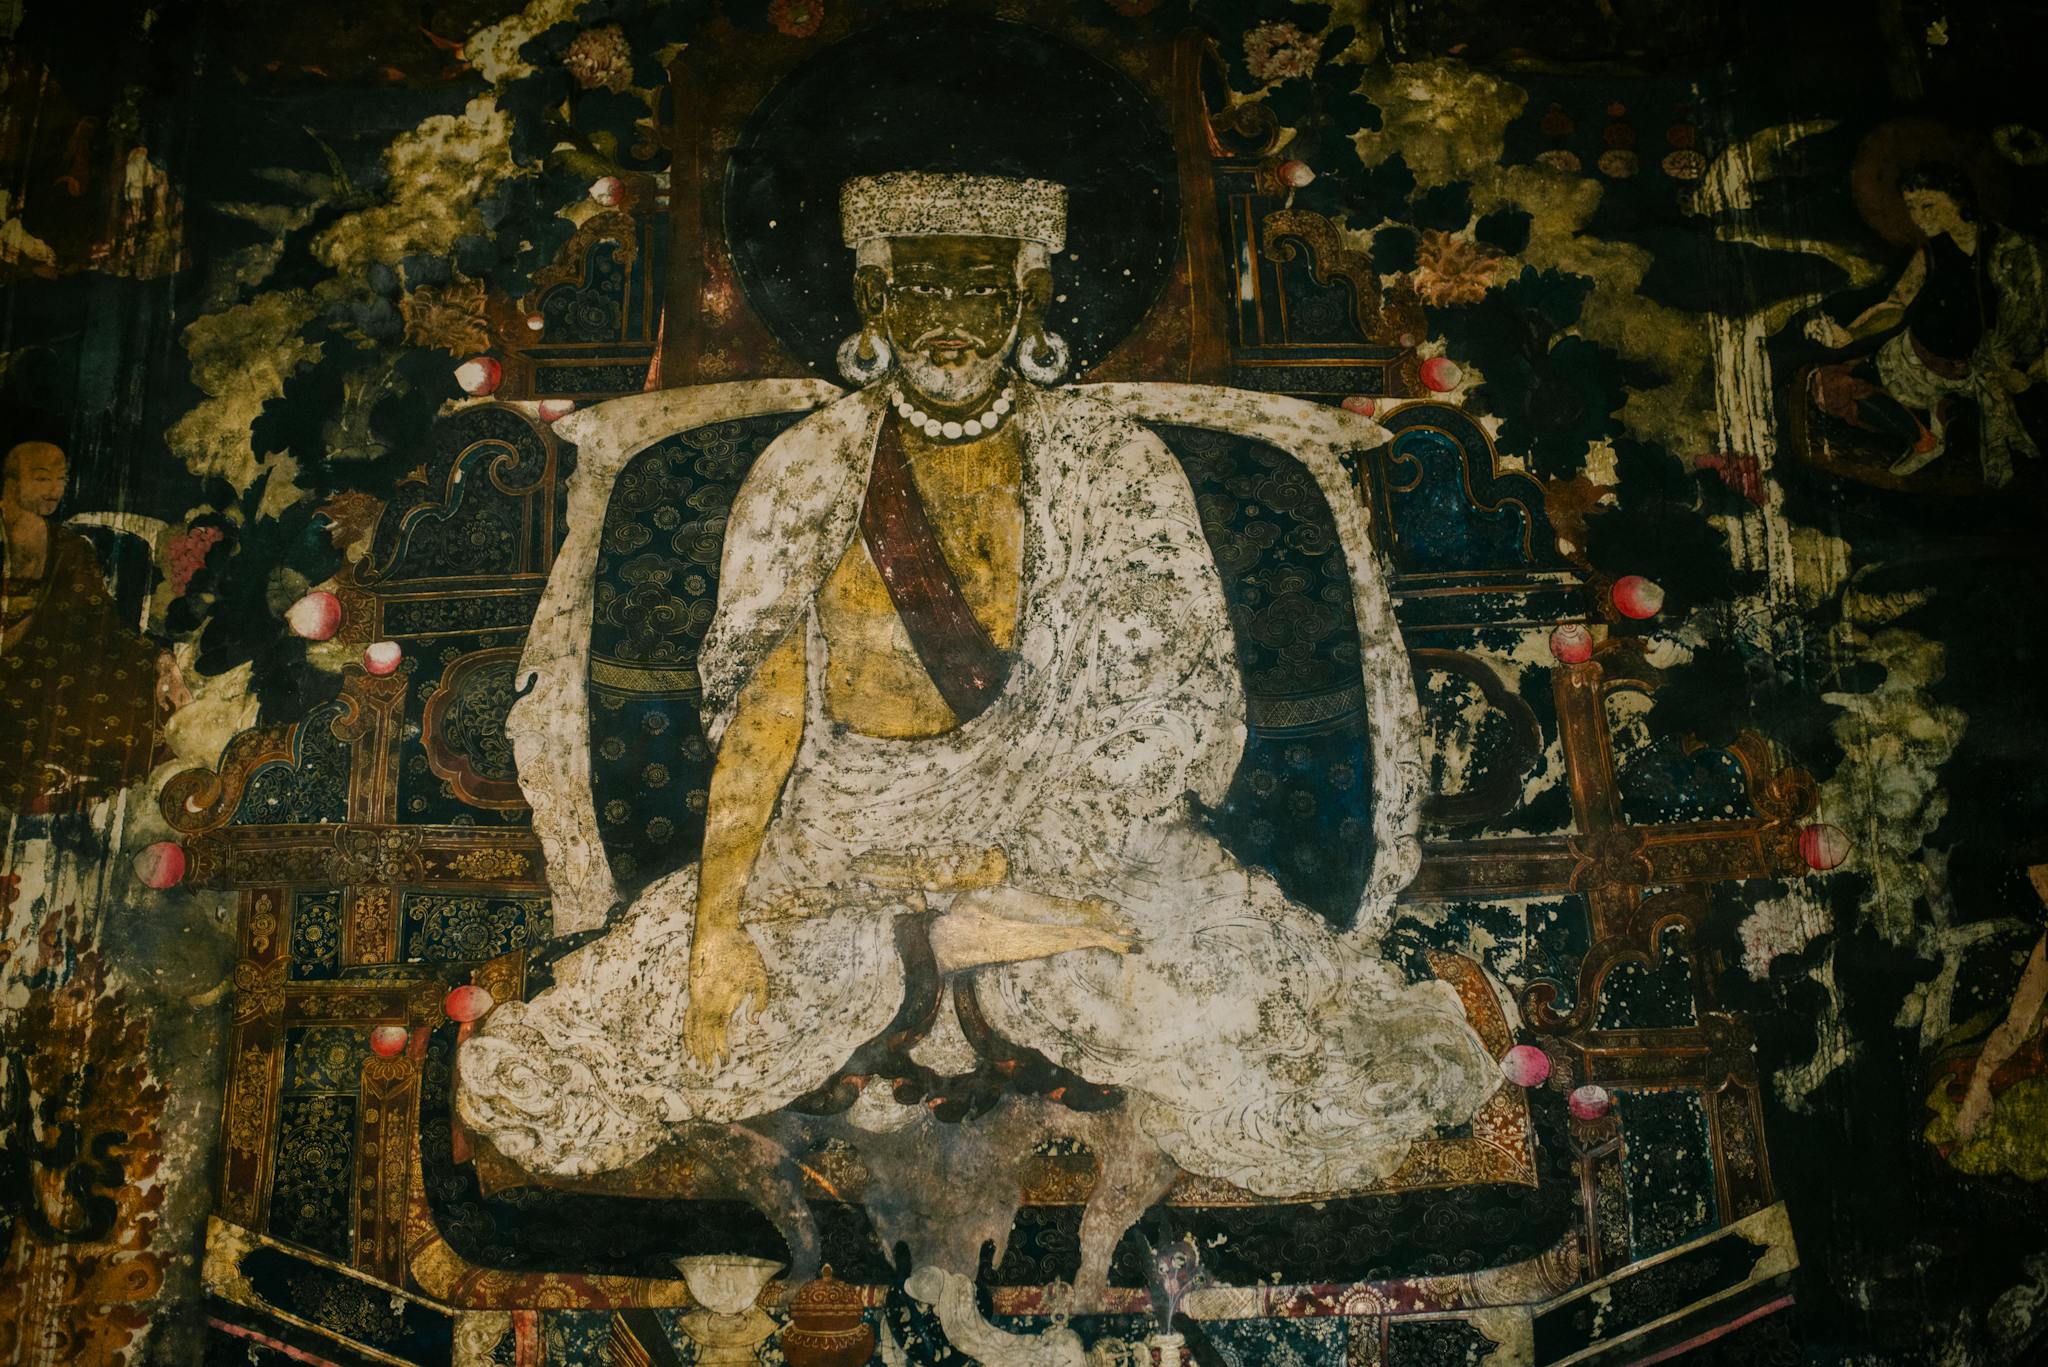 Himalayan Painting of a Monk